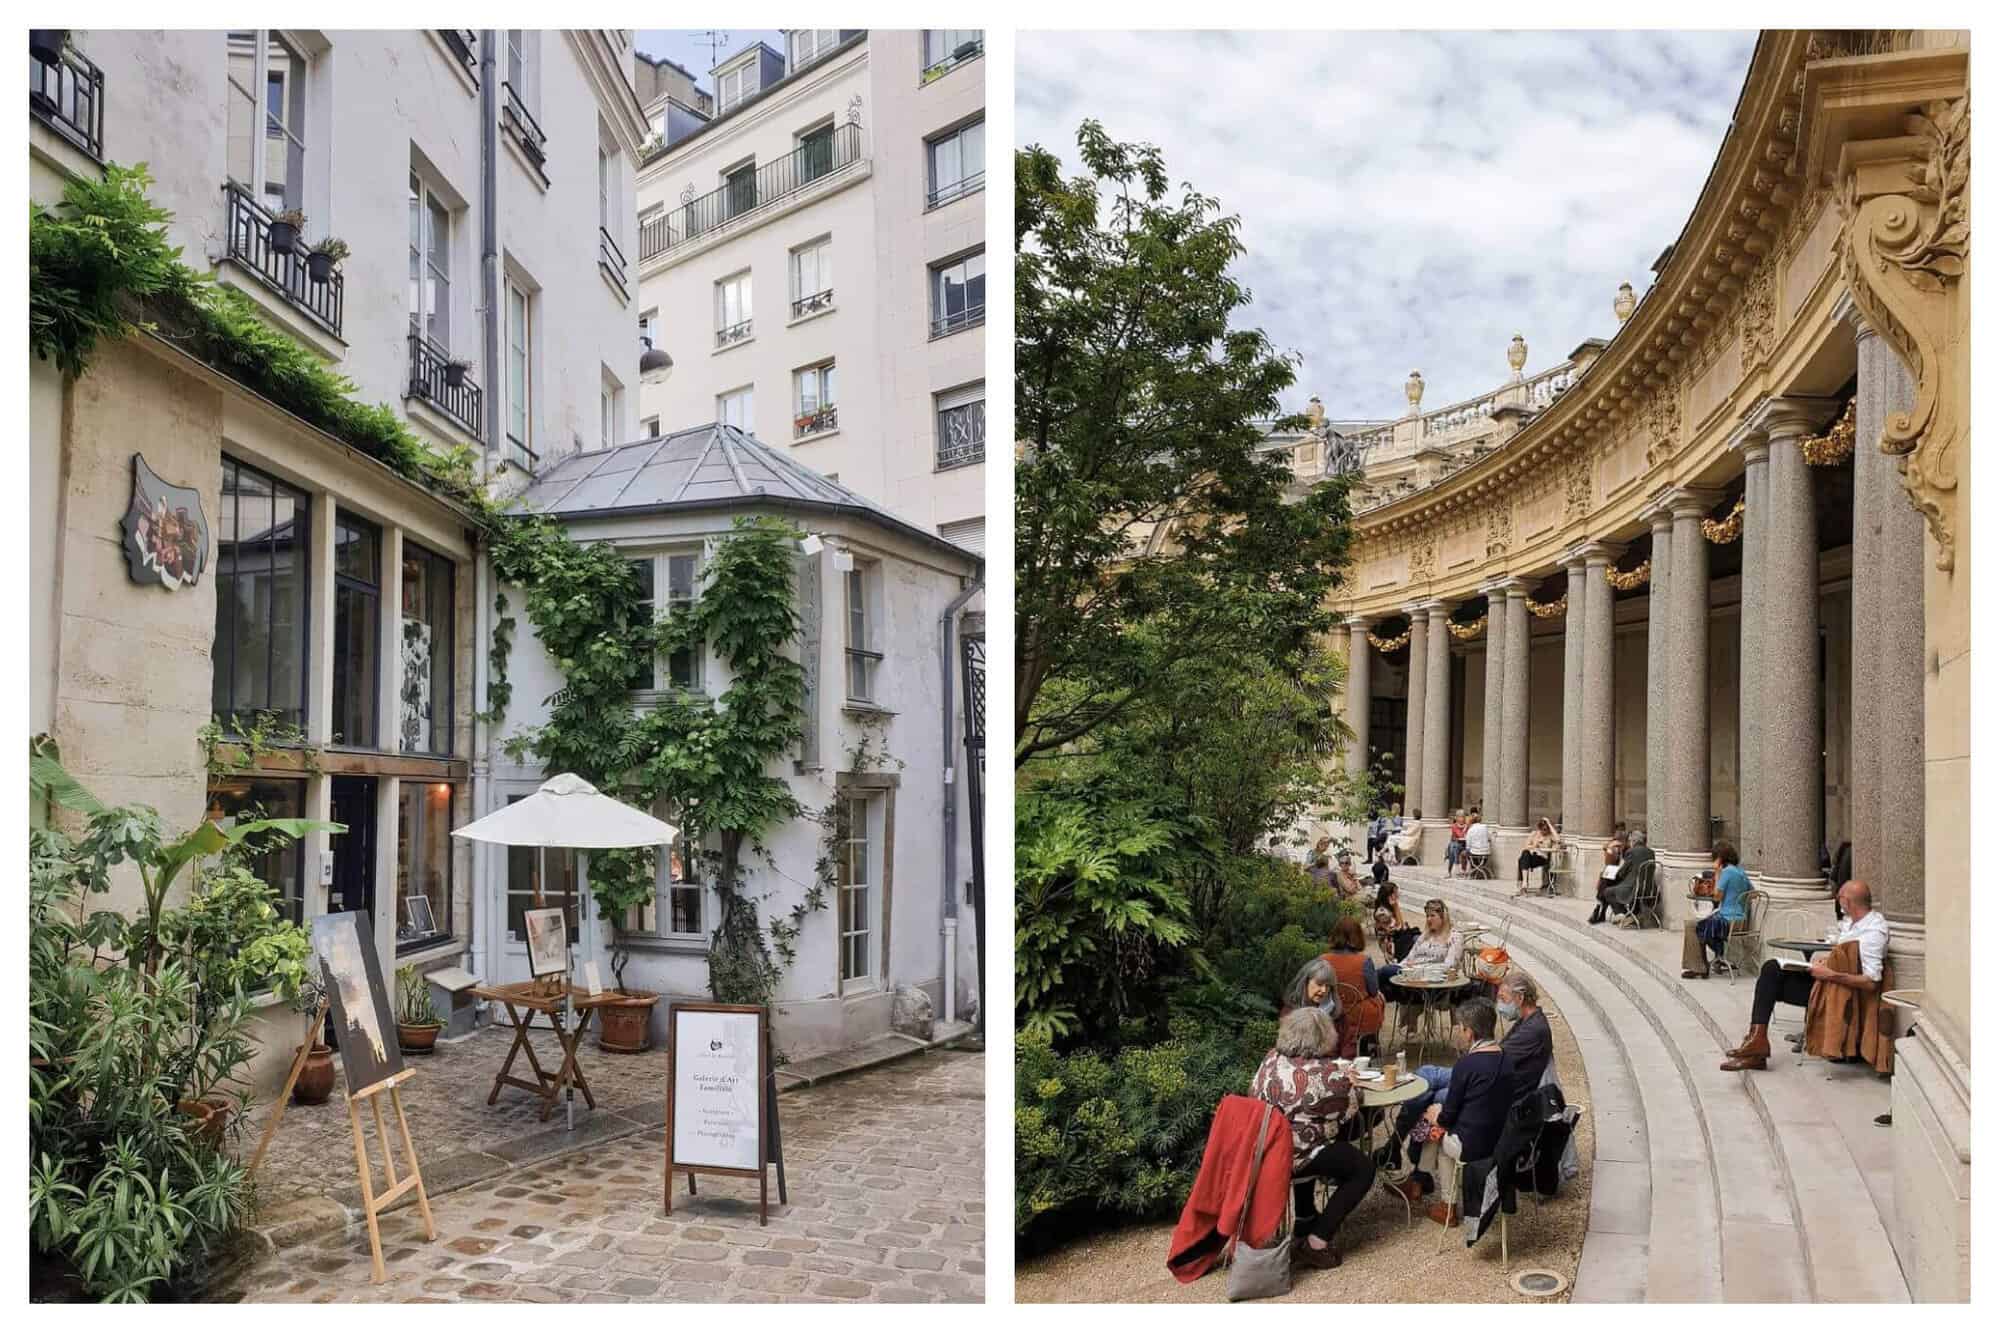 Left: A courtyard with green crawling plants and a wooden table with a white parasol. Right: A building with golden decor and gray pillars.